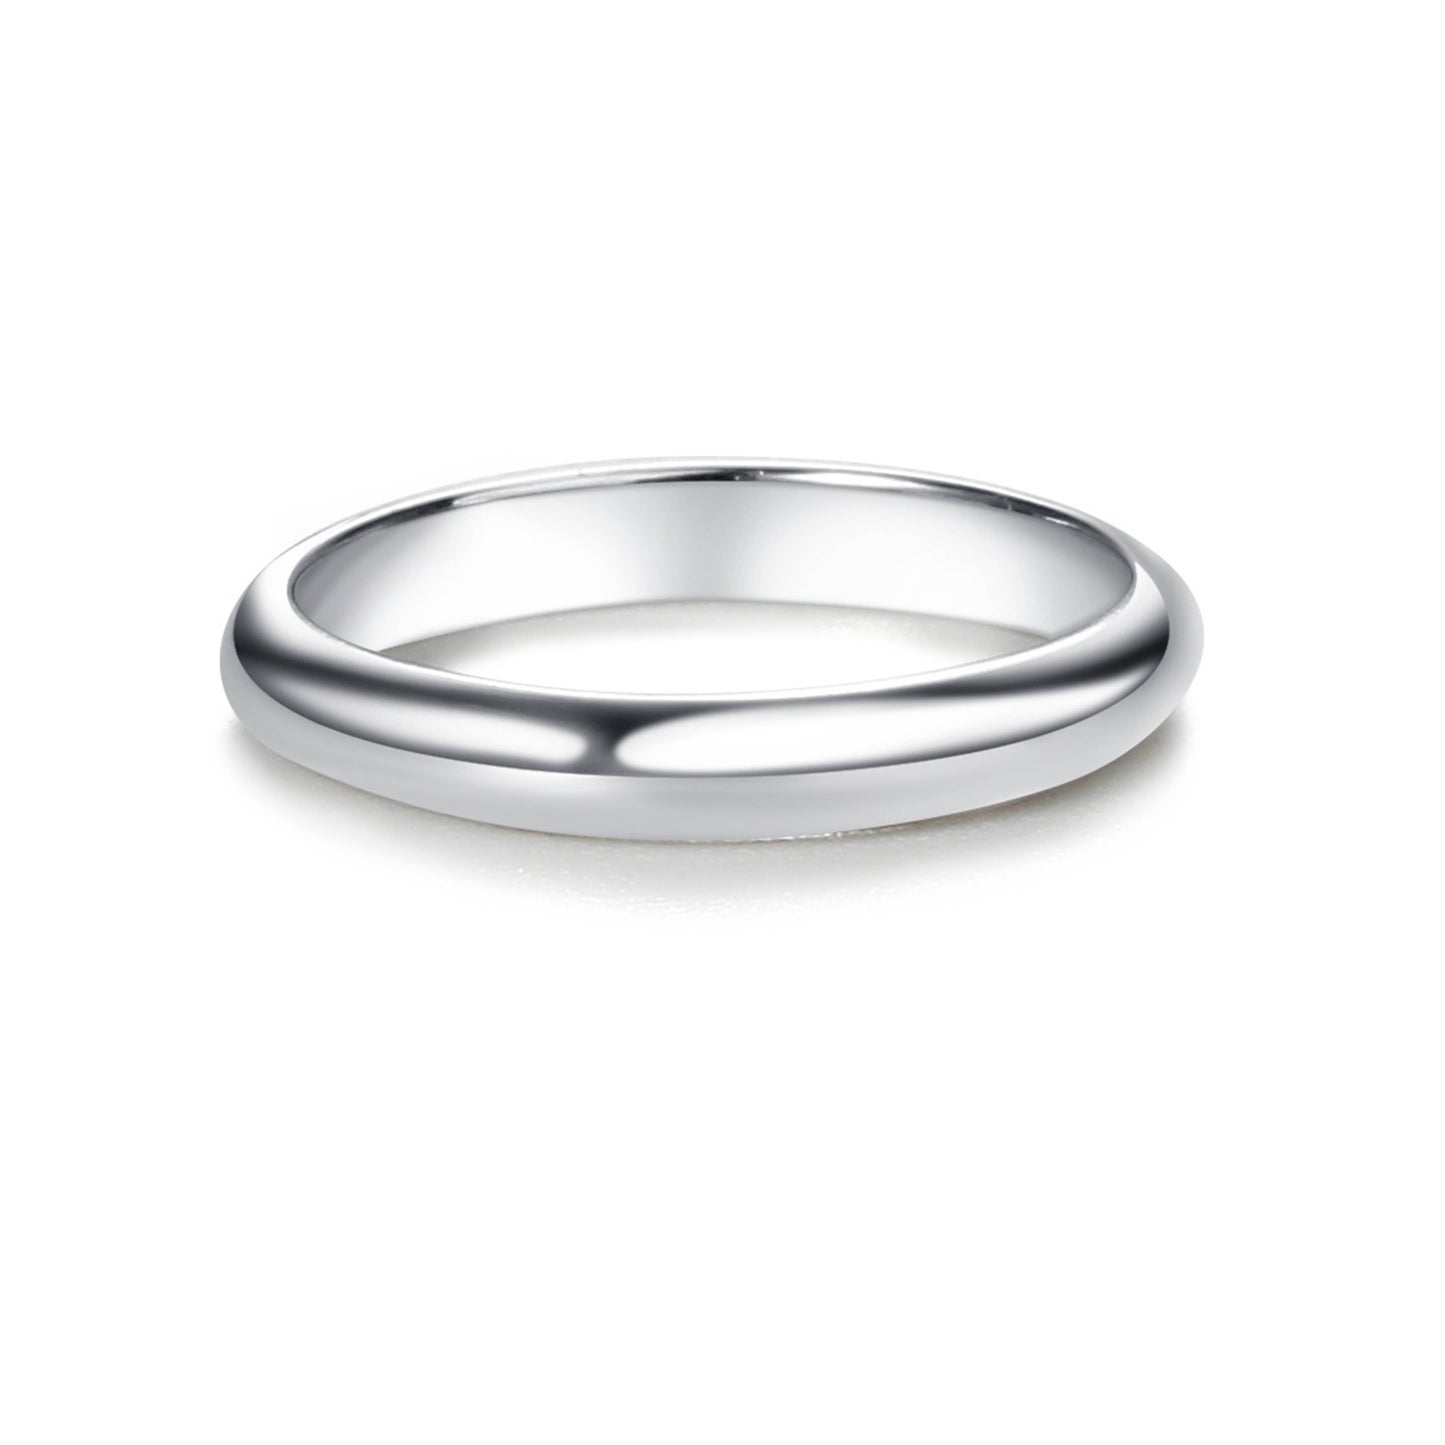 Sterling Silver Baby Ring - 2mm Silver Band for Baby & Kids Size 0 Kids Jewelry Cherished Moments   